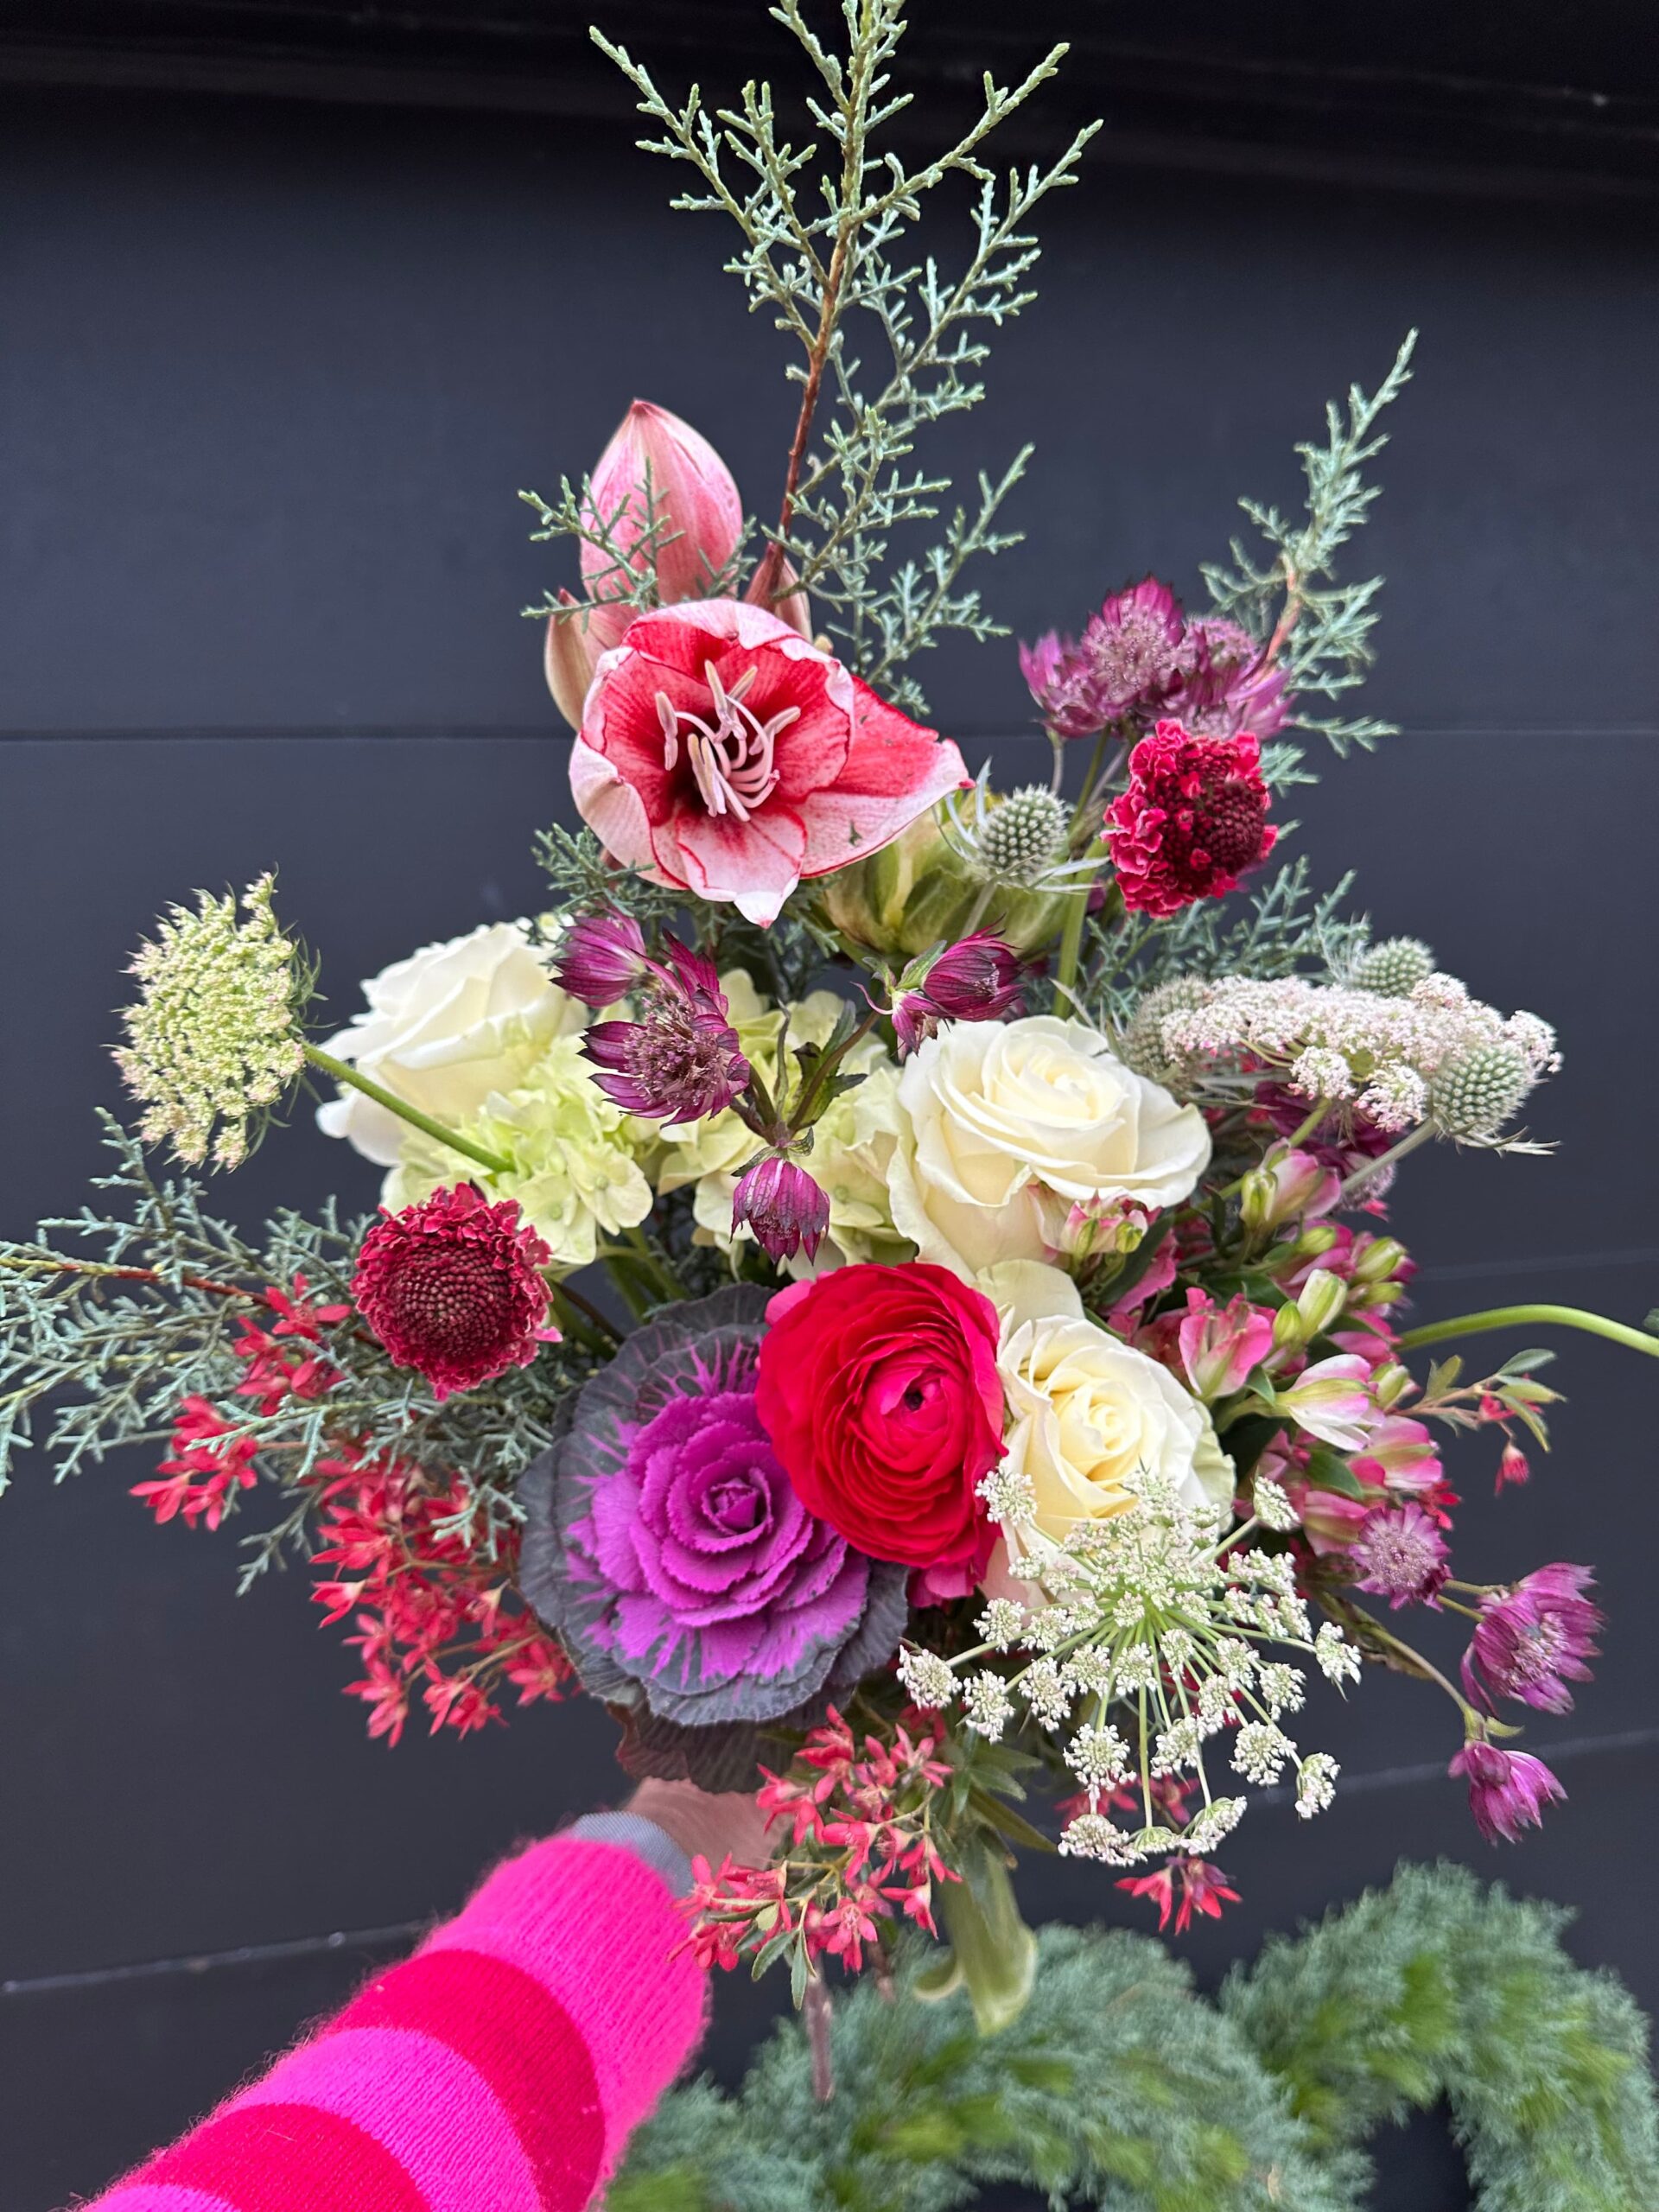 Tis the Season! Order Your Holiday Arrangements - The Shy Flower